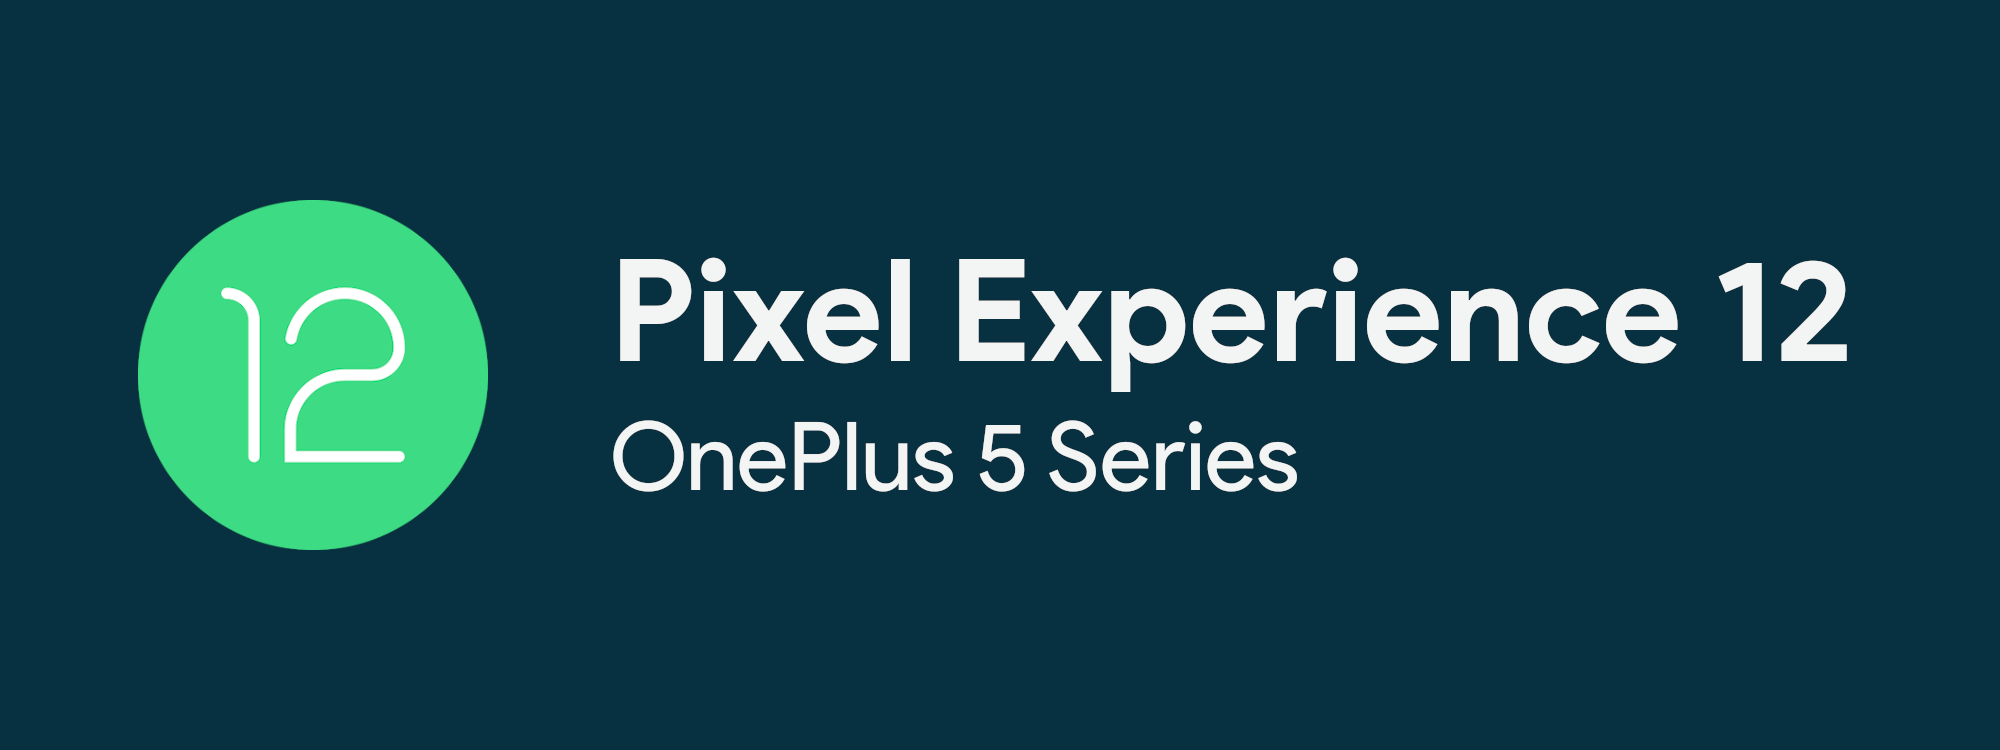 Stable Android 12 for the OnePlus 5 and 5T - Pixel Experience Custom ROM |  Lexip's Blog (xLexip)